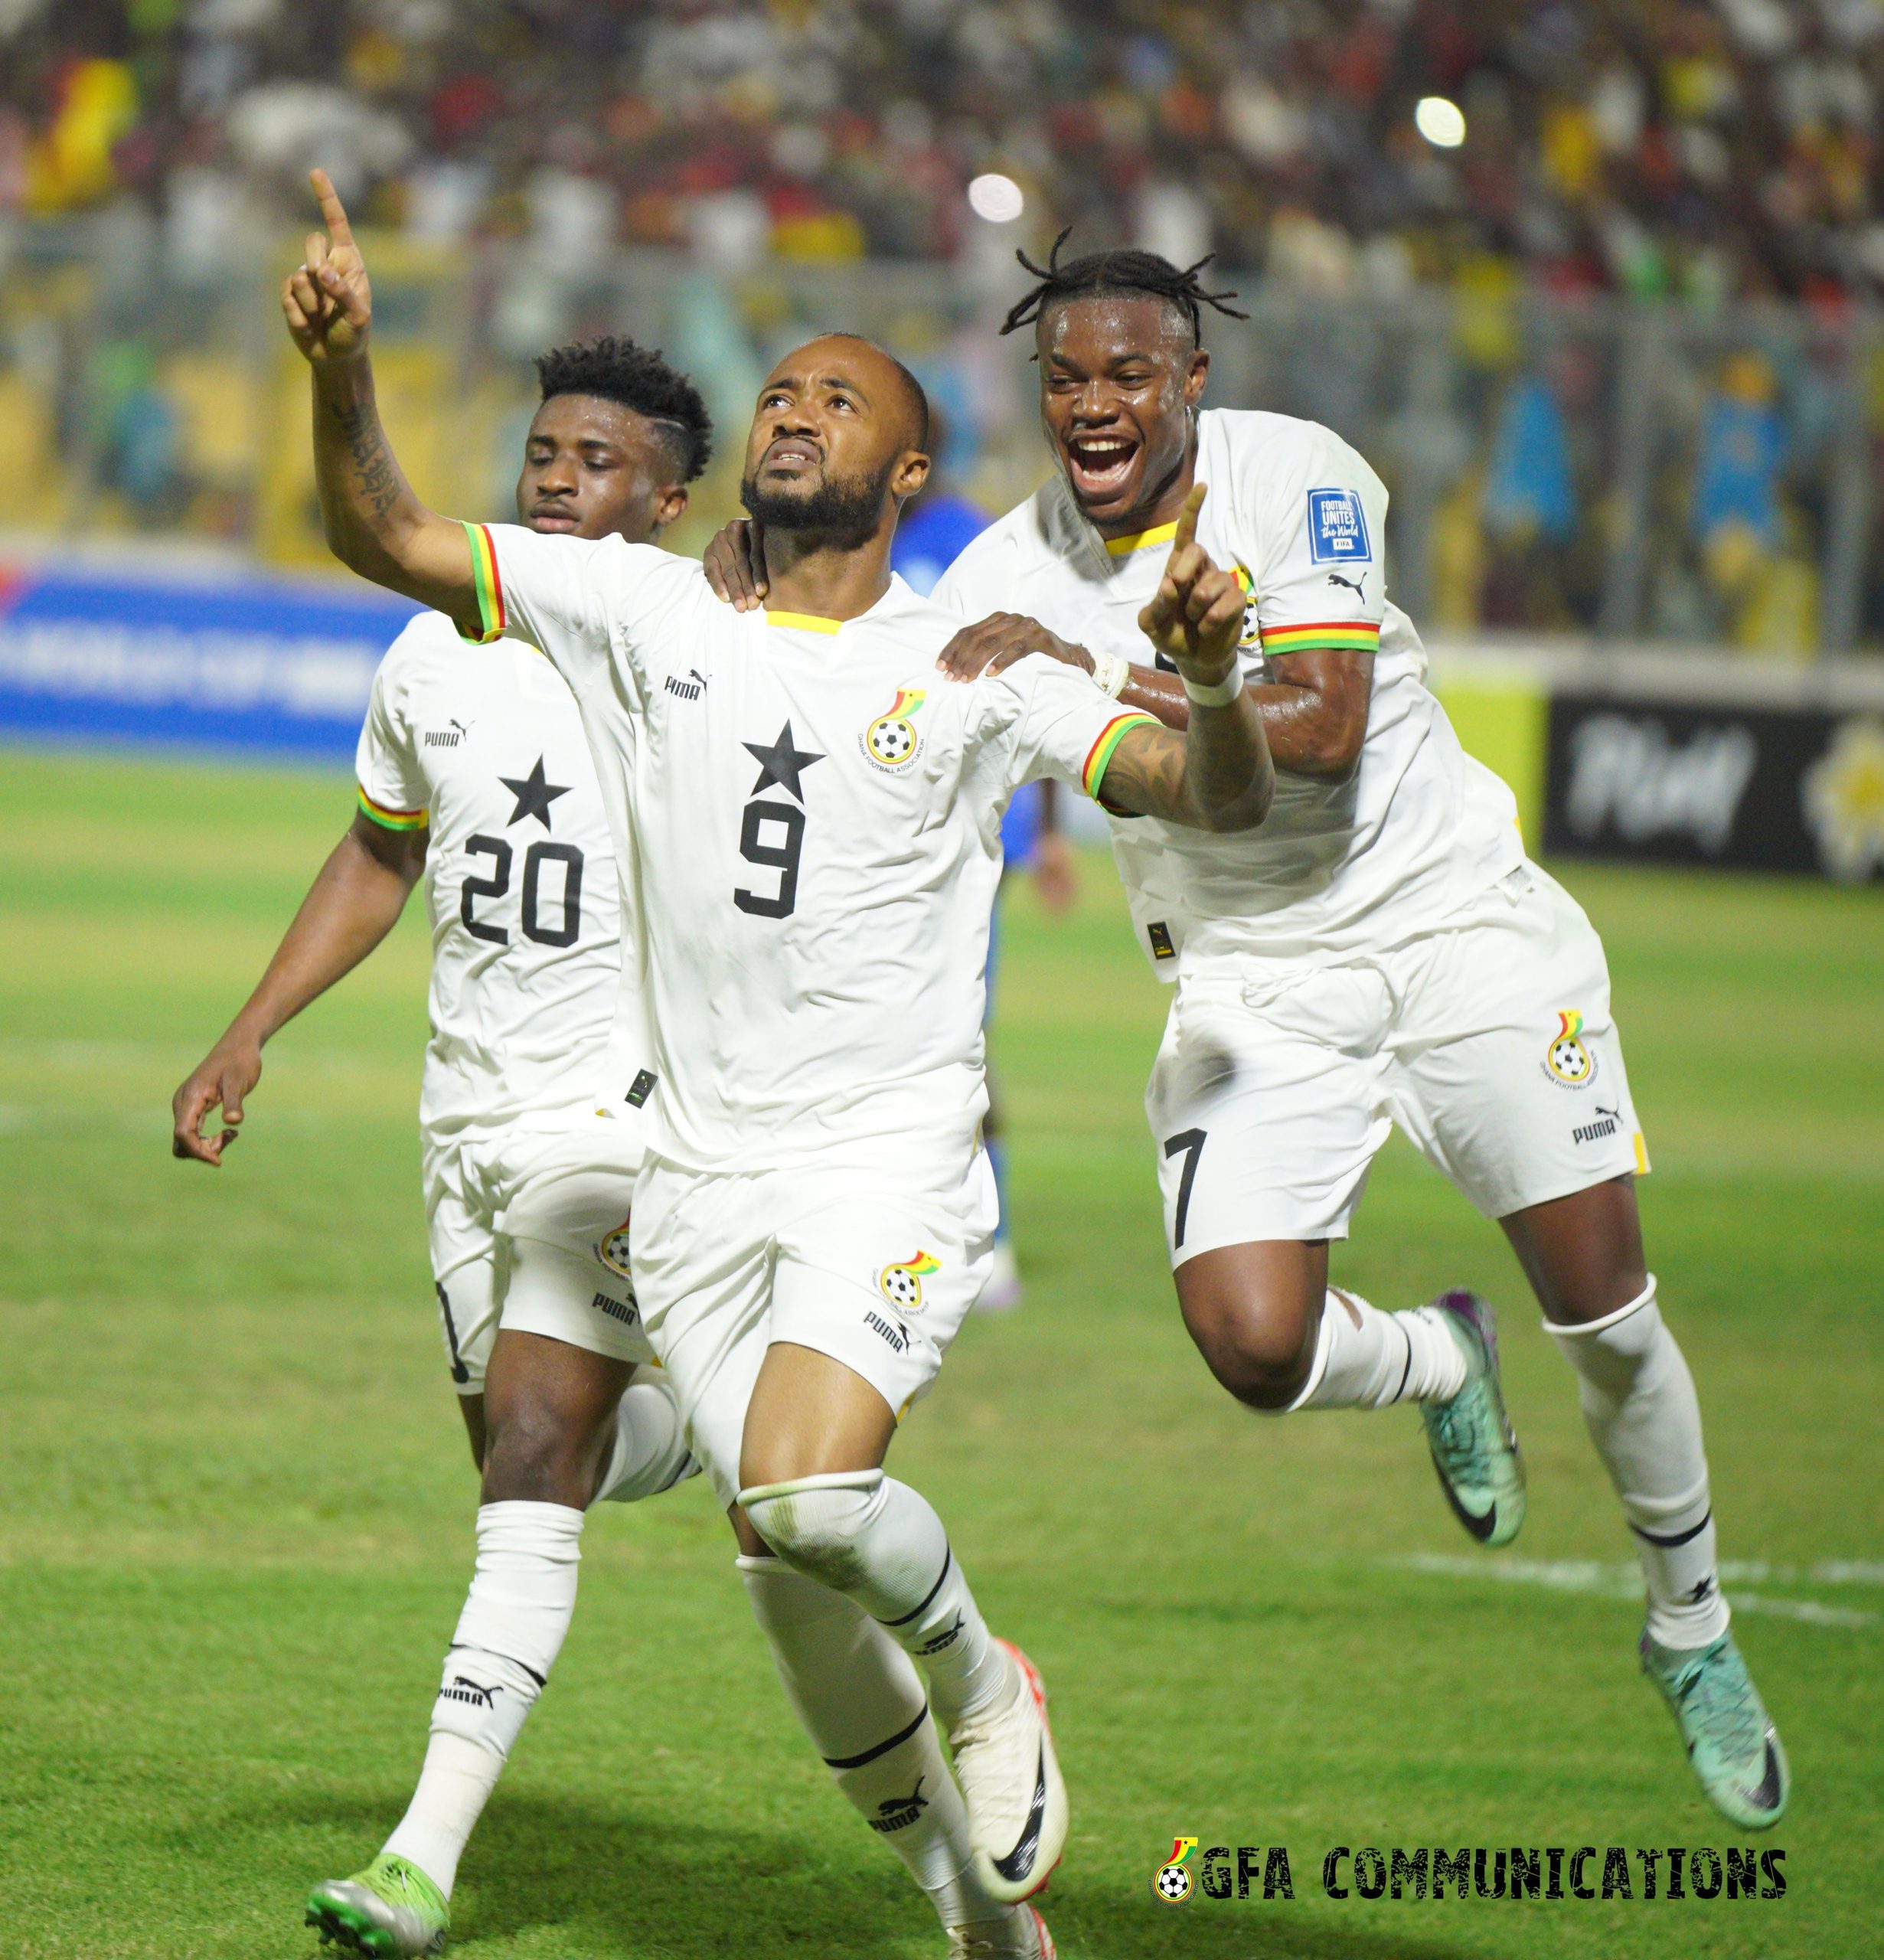 Jordan Ayew celebrates one of his goals against the Central African Republic with Fatawu Issahaku and Mohammed Kudus in Kumasi on June 10, 2024